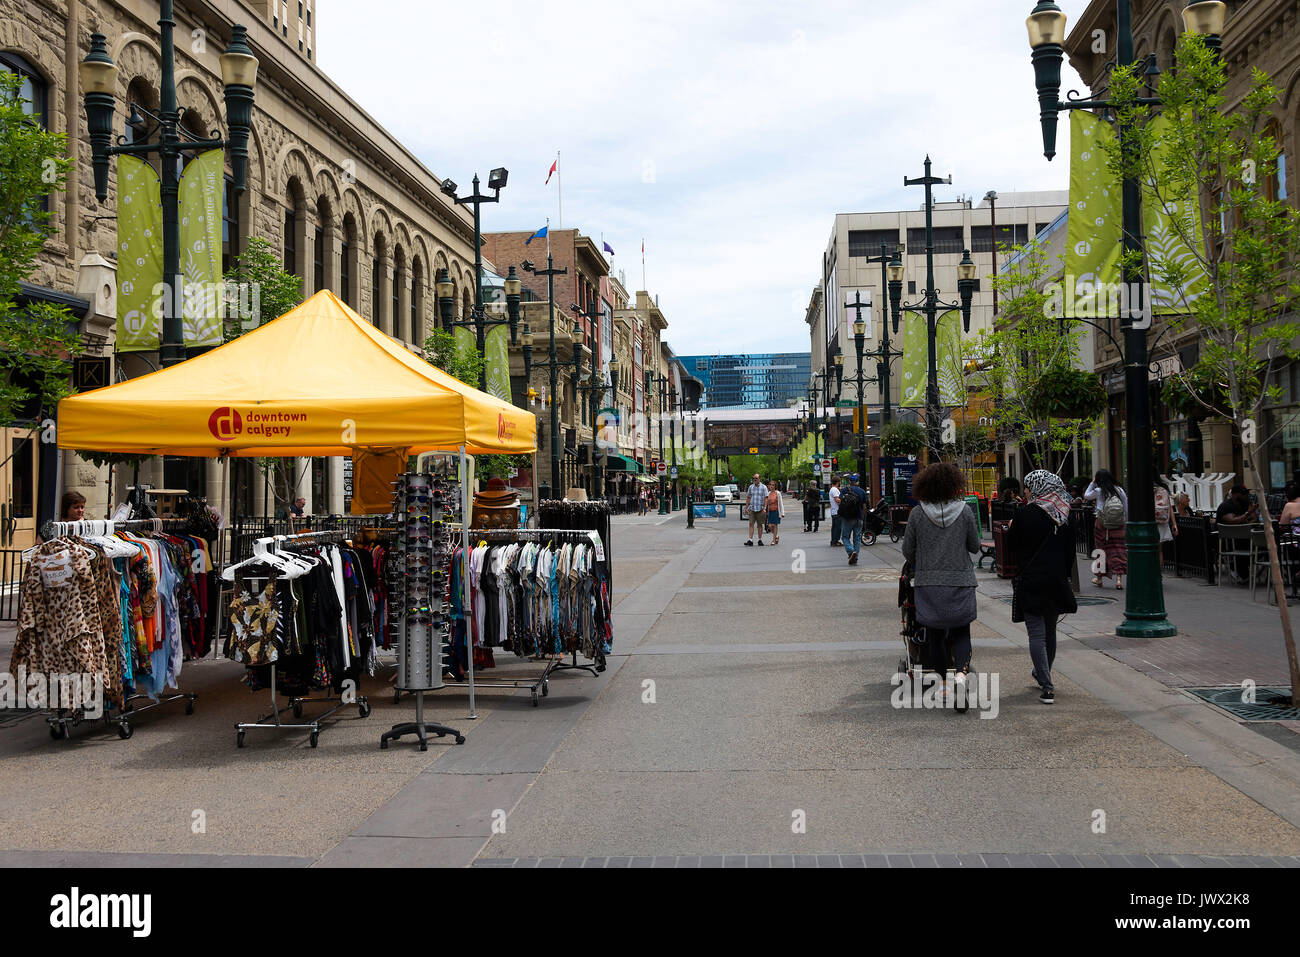 The View Down 8 Avenue SE Stephen Avenue SE in Downtown Calgary Alberta Canada with Street Trader Selling Clothing Stock Photo